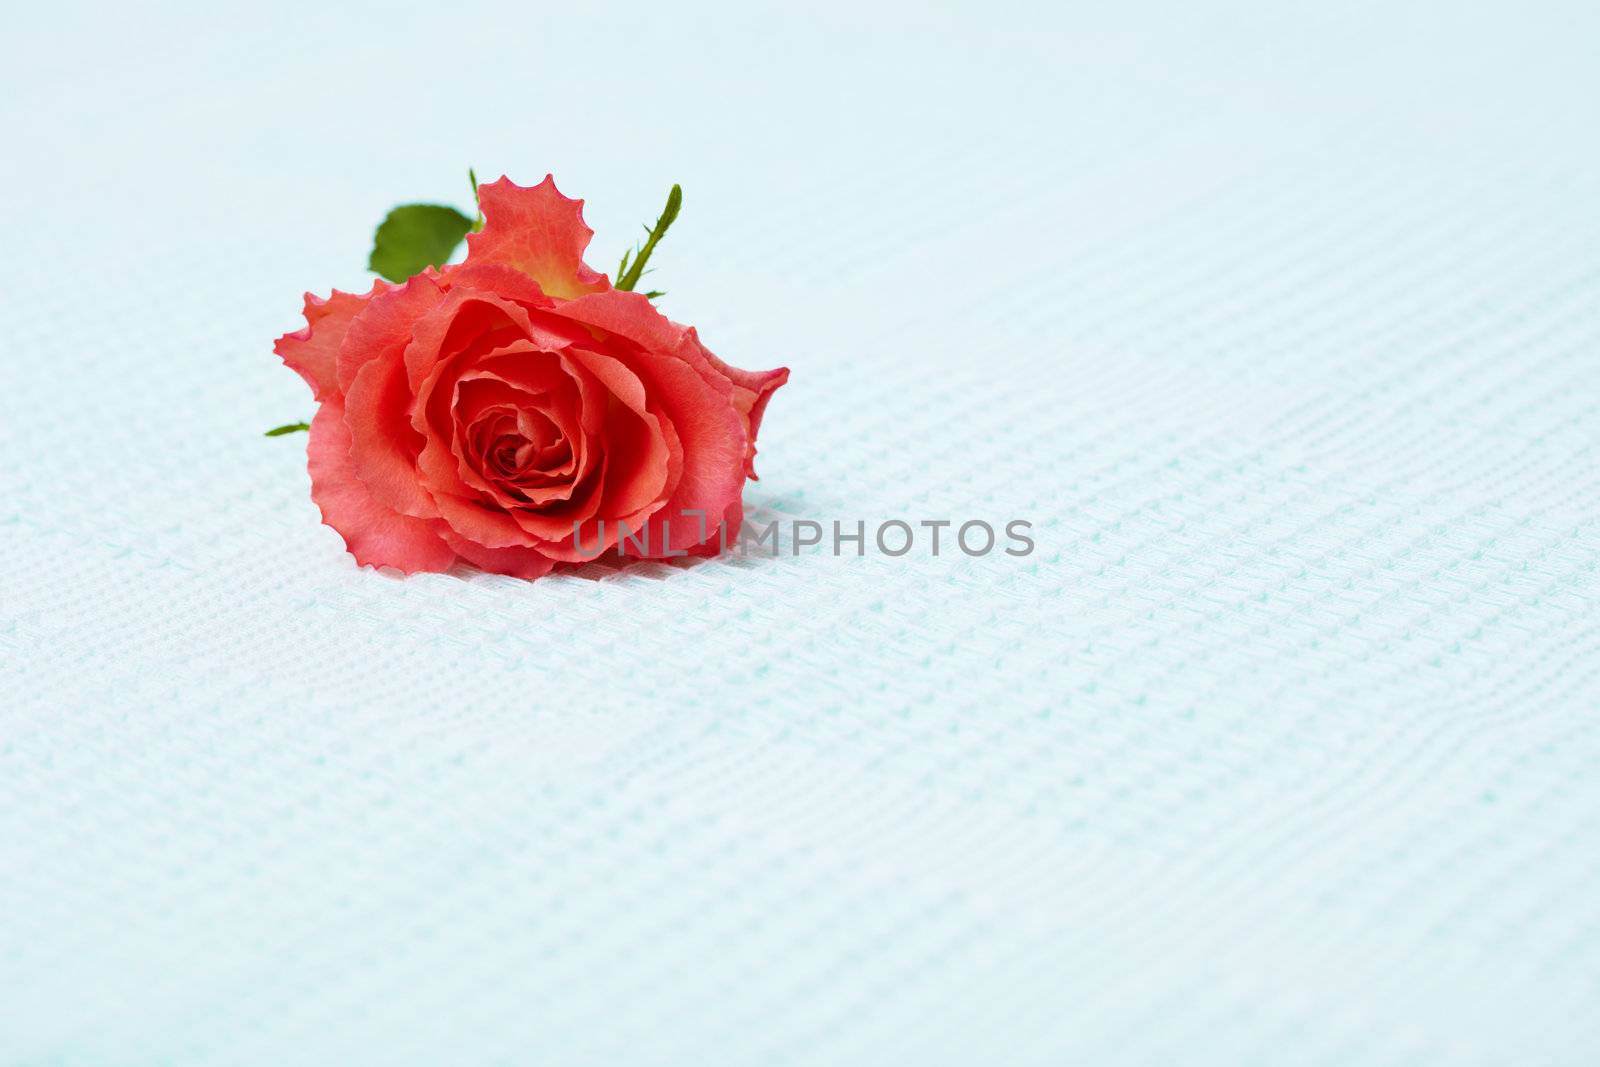 Lone red rose on blue towel by pzaxe